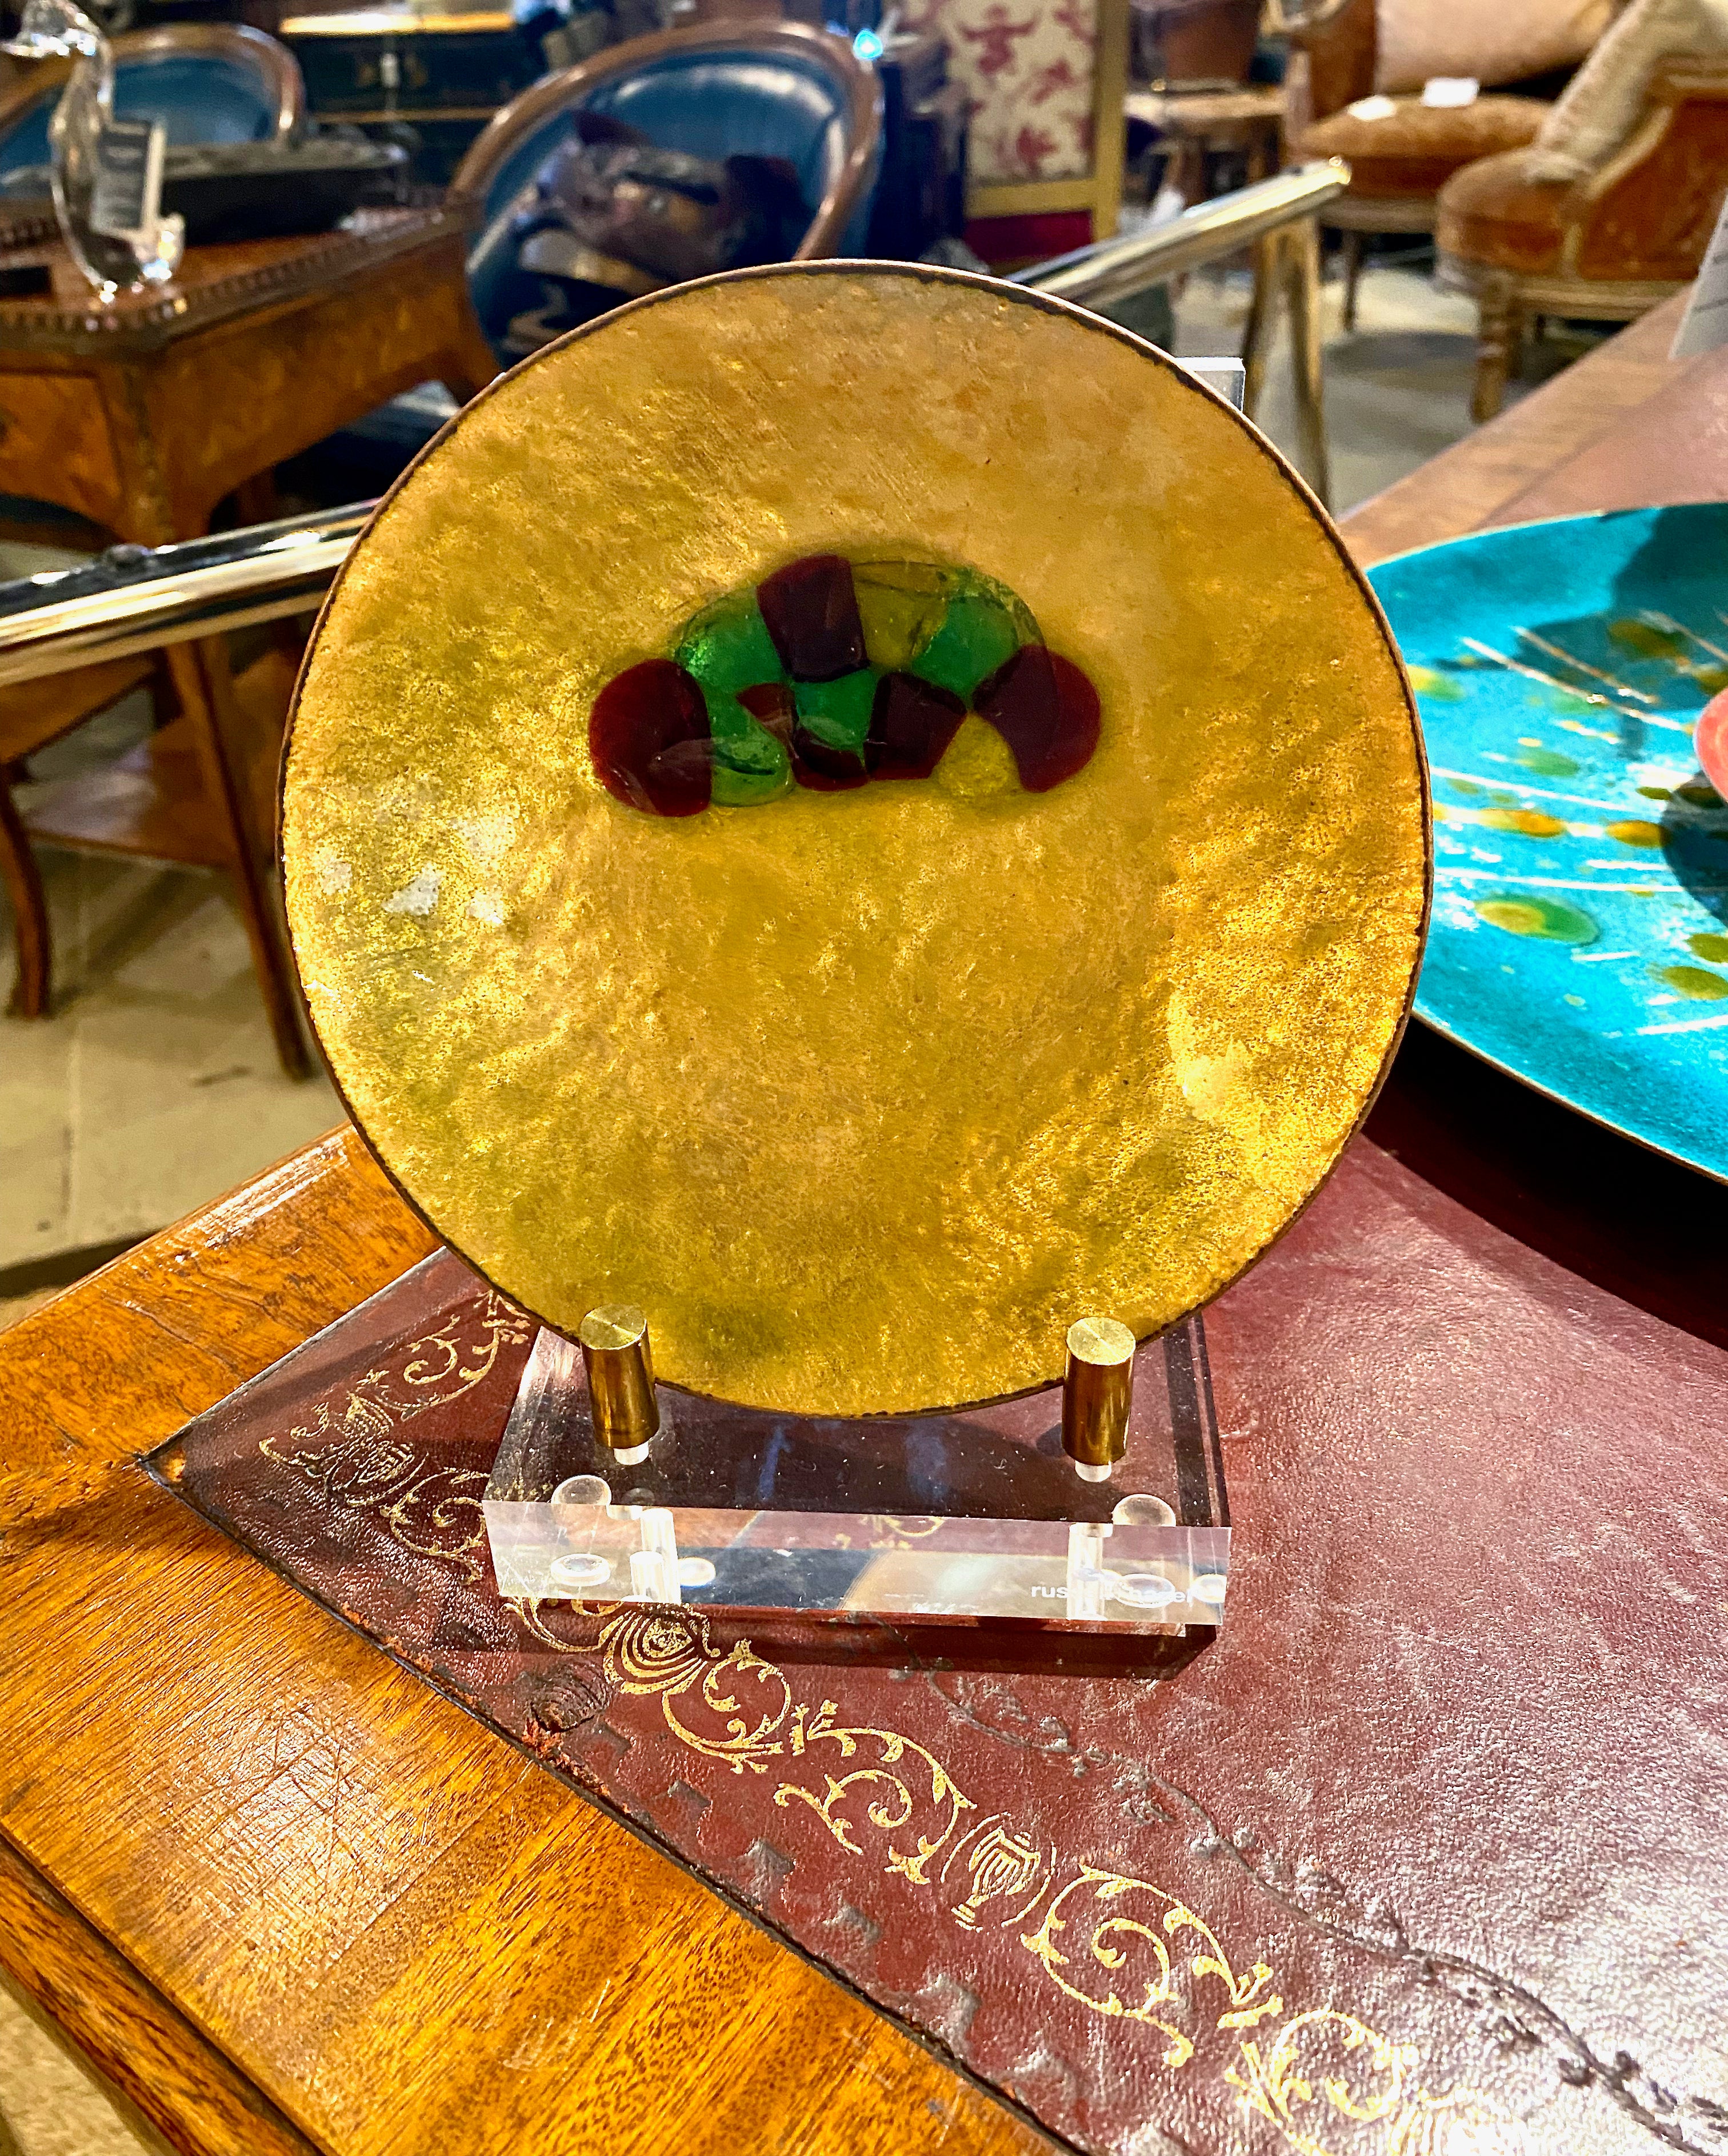 This is a charming mid-century vide-poche in enamel-on-copper. The catchall features an abstraction of multi-colored pebbles on a stunning lustrous gold enamel background. The dish can be used as a vide-poche or positioned on a stand as a table